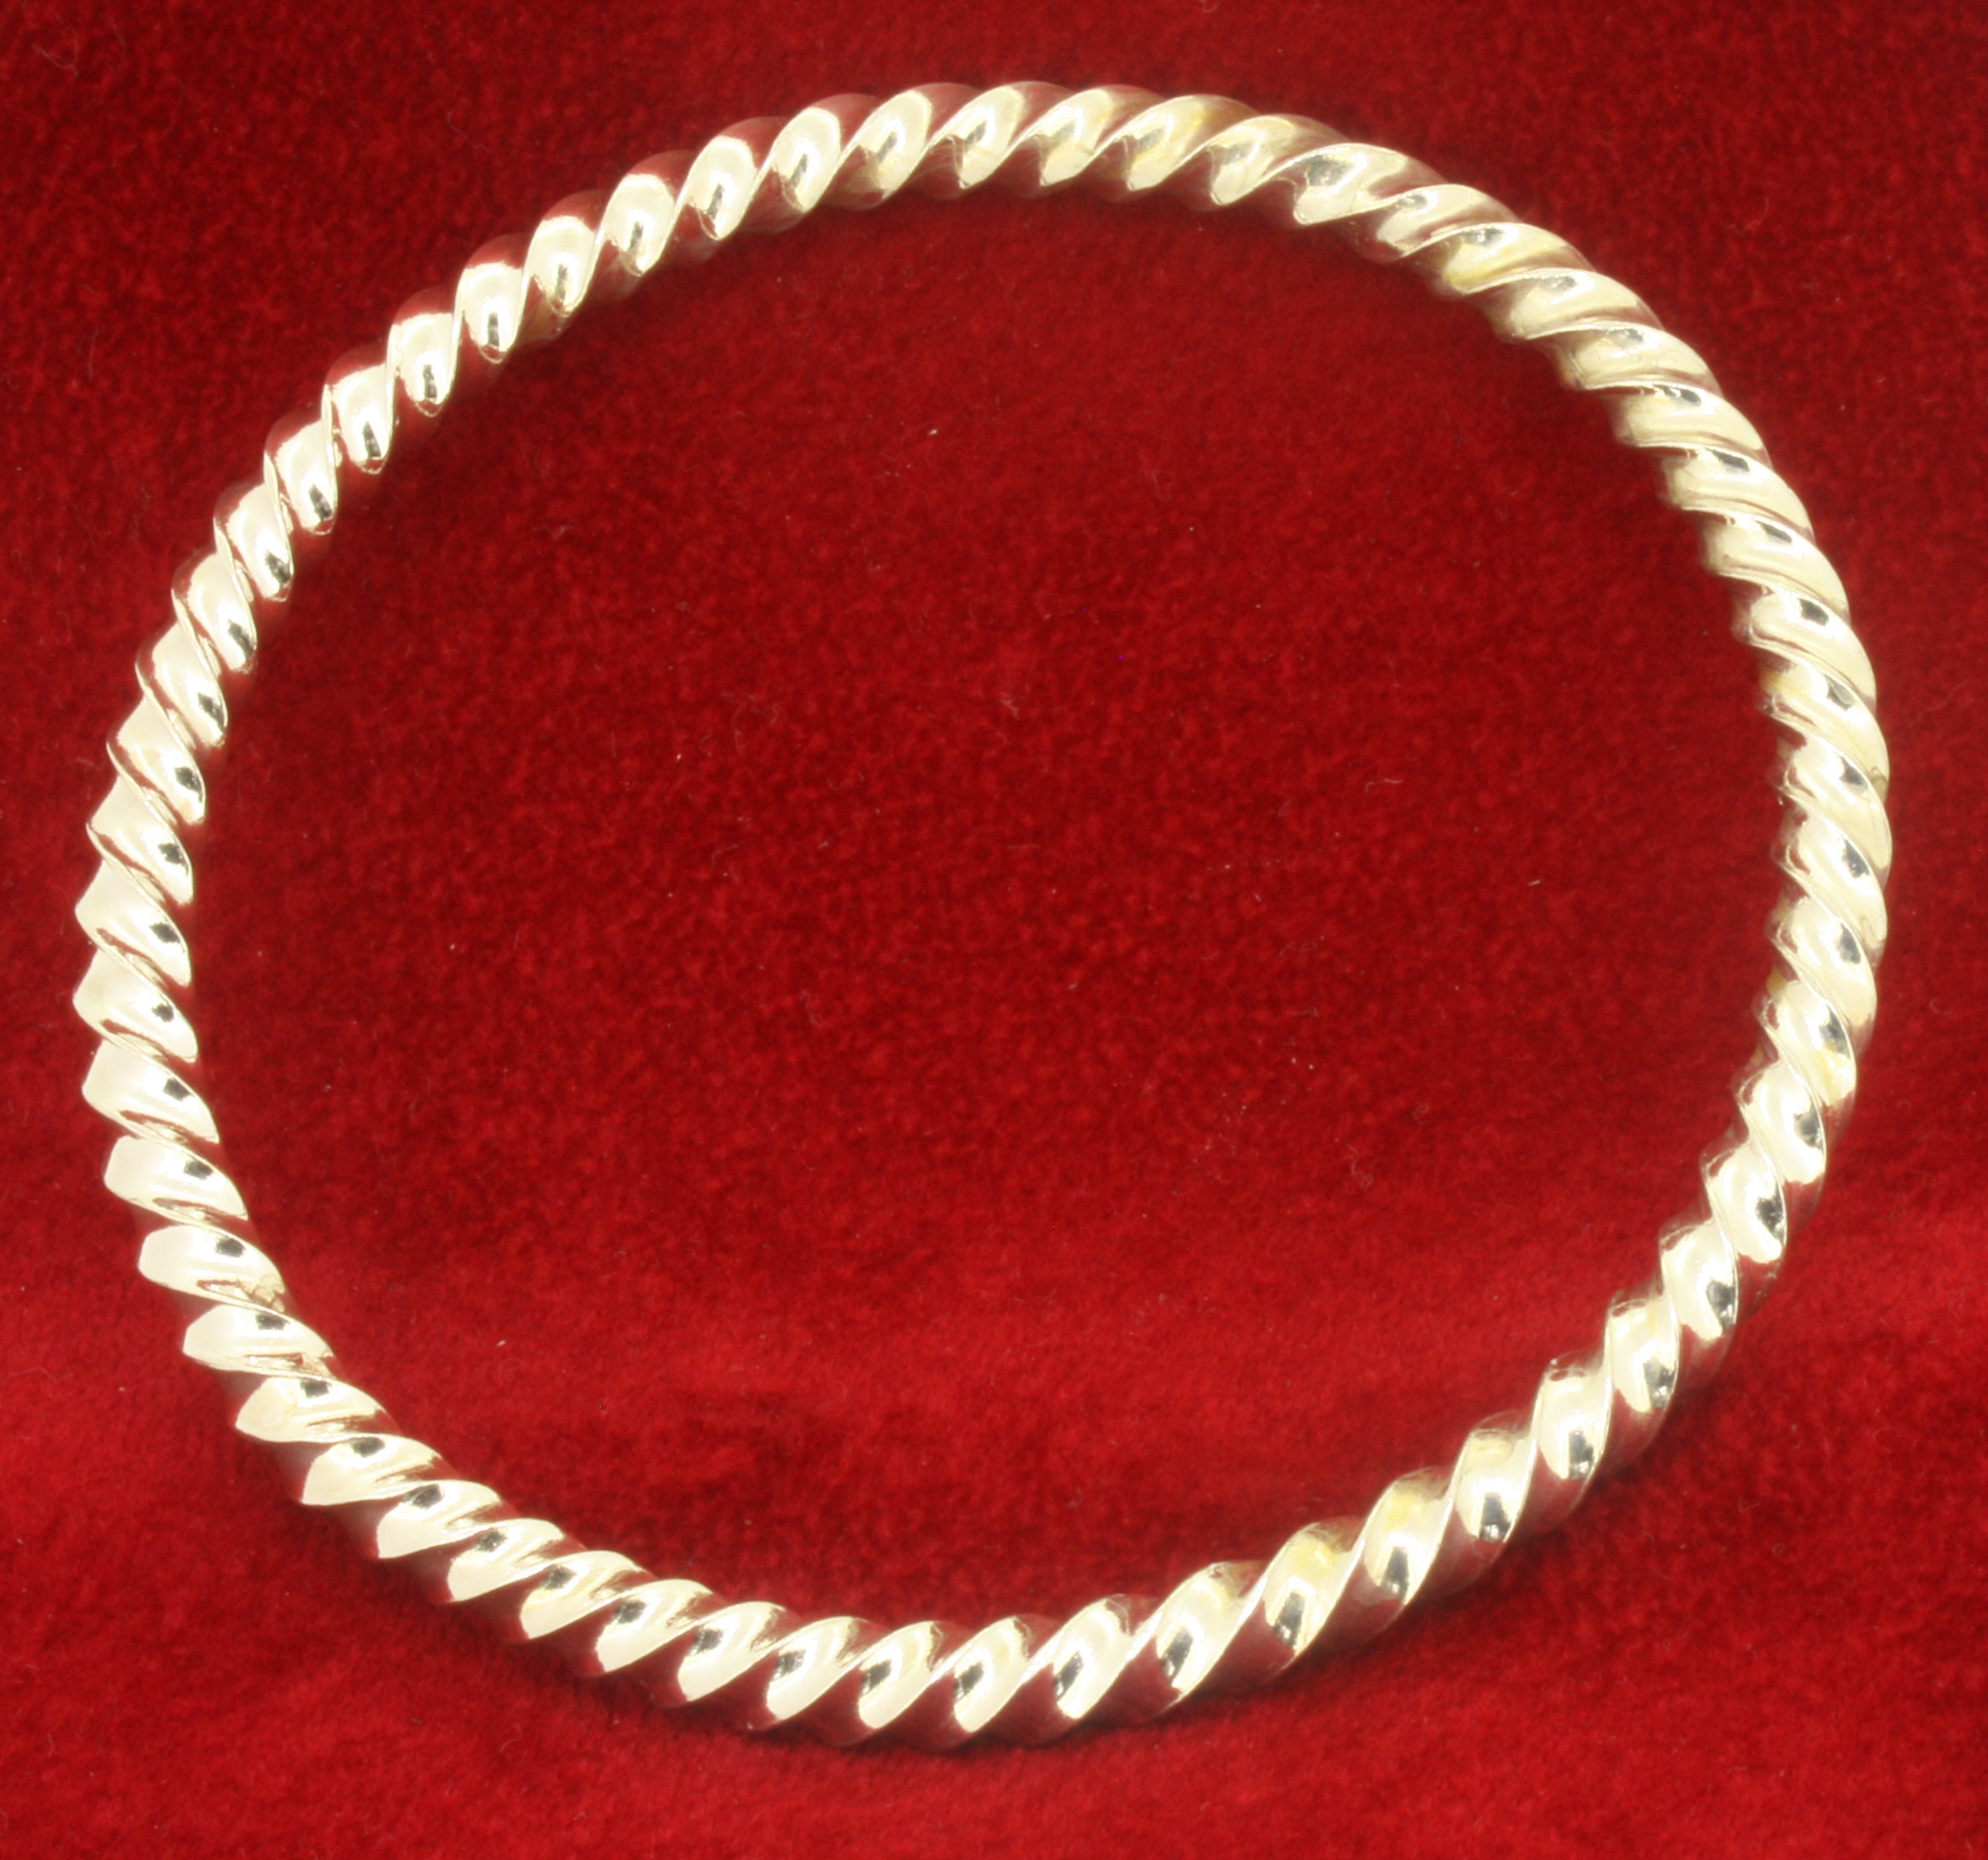 Solid Sterling Silver Handmade Round Twisted Bangle - Image 2 of 2